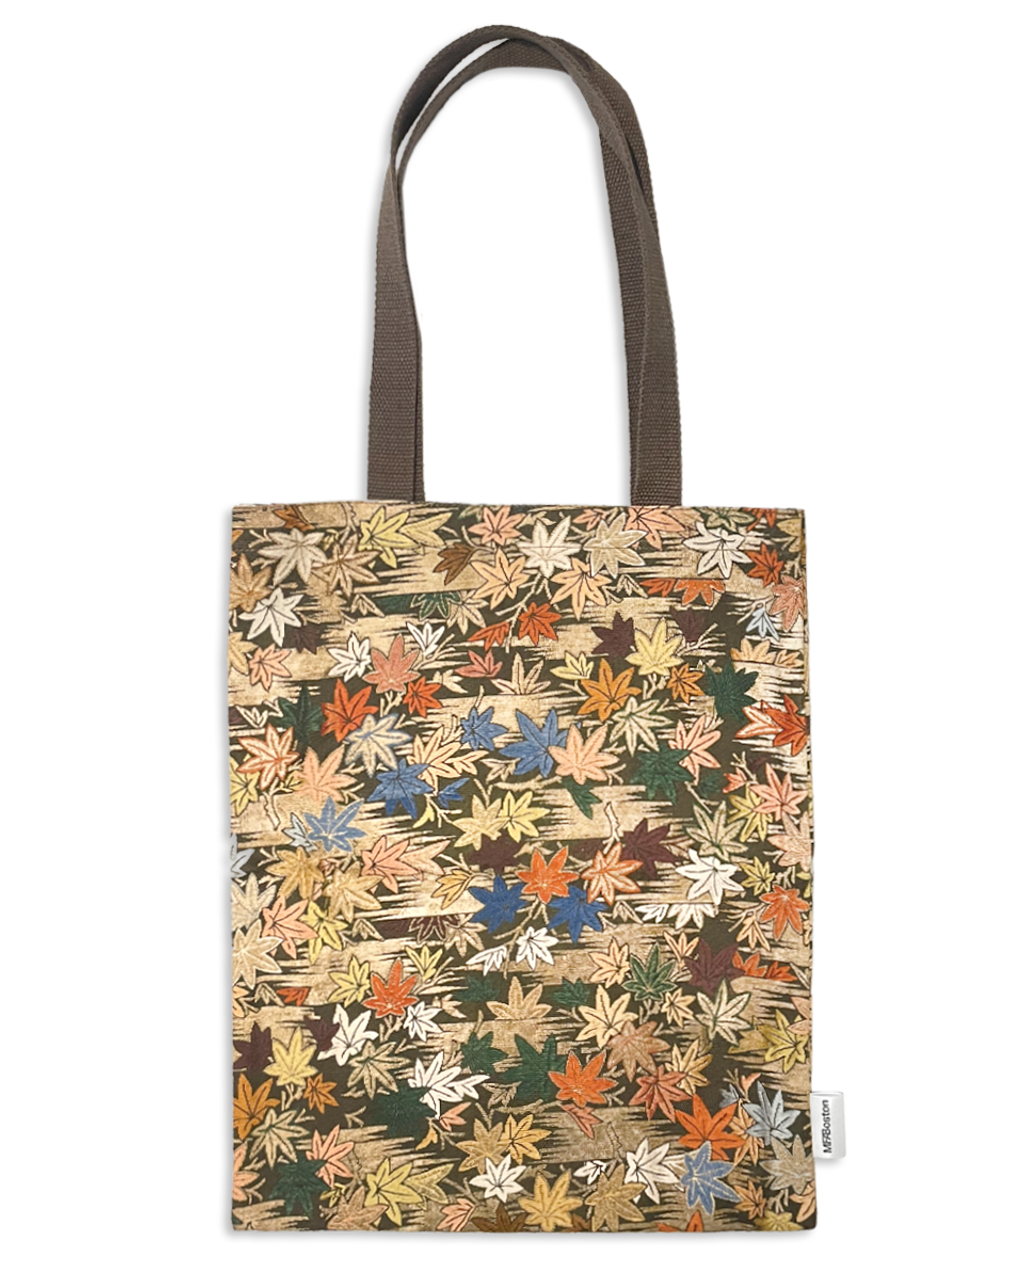 https://cdn11.bigcommerce.com/s-g8qyo70dwl/images/stencil/1280x1280/products/4536/9550/999f6c44Tote_Fall%20Leaves__45879.1698241438.png?c=1